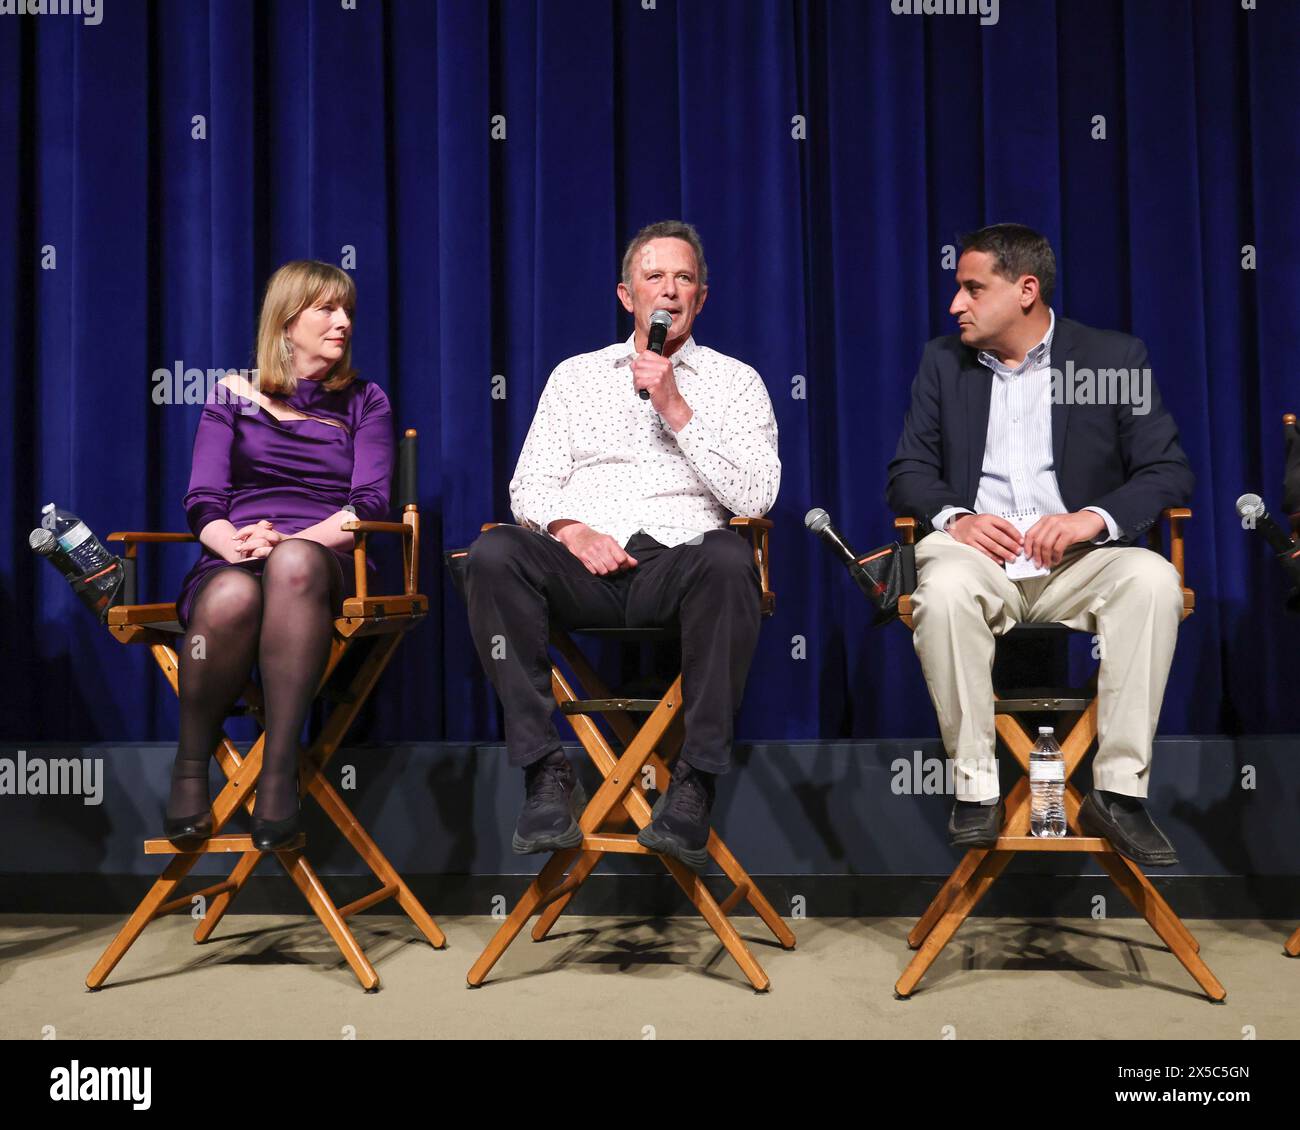 Beverly Hills, California, USA. 2nd May, 2024. Panelists Fionnuala D. Ní Aoláin, United Nations special rapporteur on human rights, Michael Rapkin, detainee defense attorney, and moderator Jeremy Kuzmarov,  at the Los Angeles Premiere of 'I Am Gitmgo' and the launch of the CLSNOW streaming platform with presentation of the CLSNOW Human Rights Award to Fionnuala D. Ní Aoláin, at the Writers Guild Theater in Beverly Hills, California. Credit: Sheri Determan Stock Photo